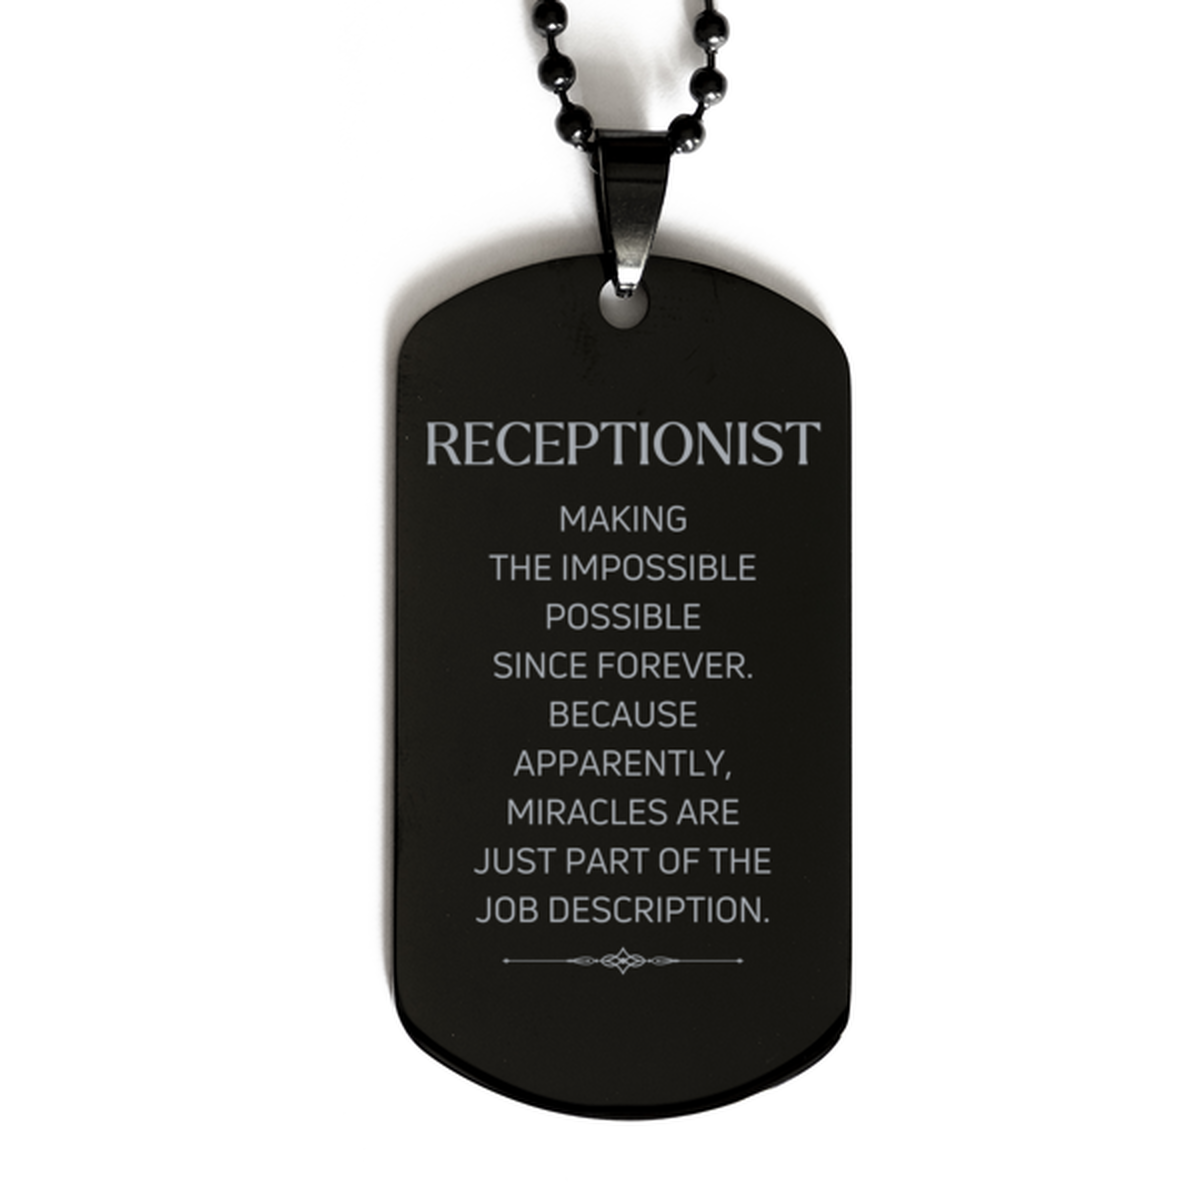 Funny Receptionist Gifts, Miracles are just part of the job description, Inspirational Birthday Black Dog Tag For Receptionist, Men, Women, Coworkers, Friends, Boss